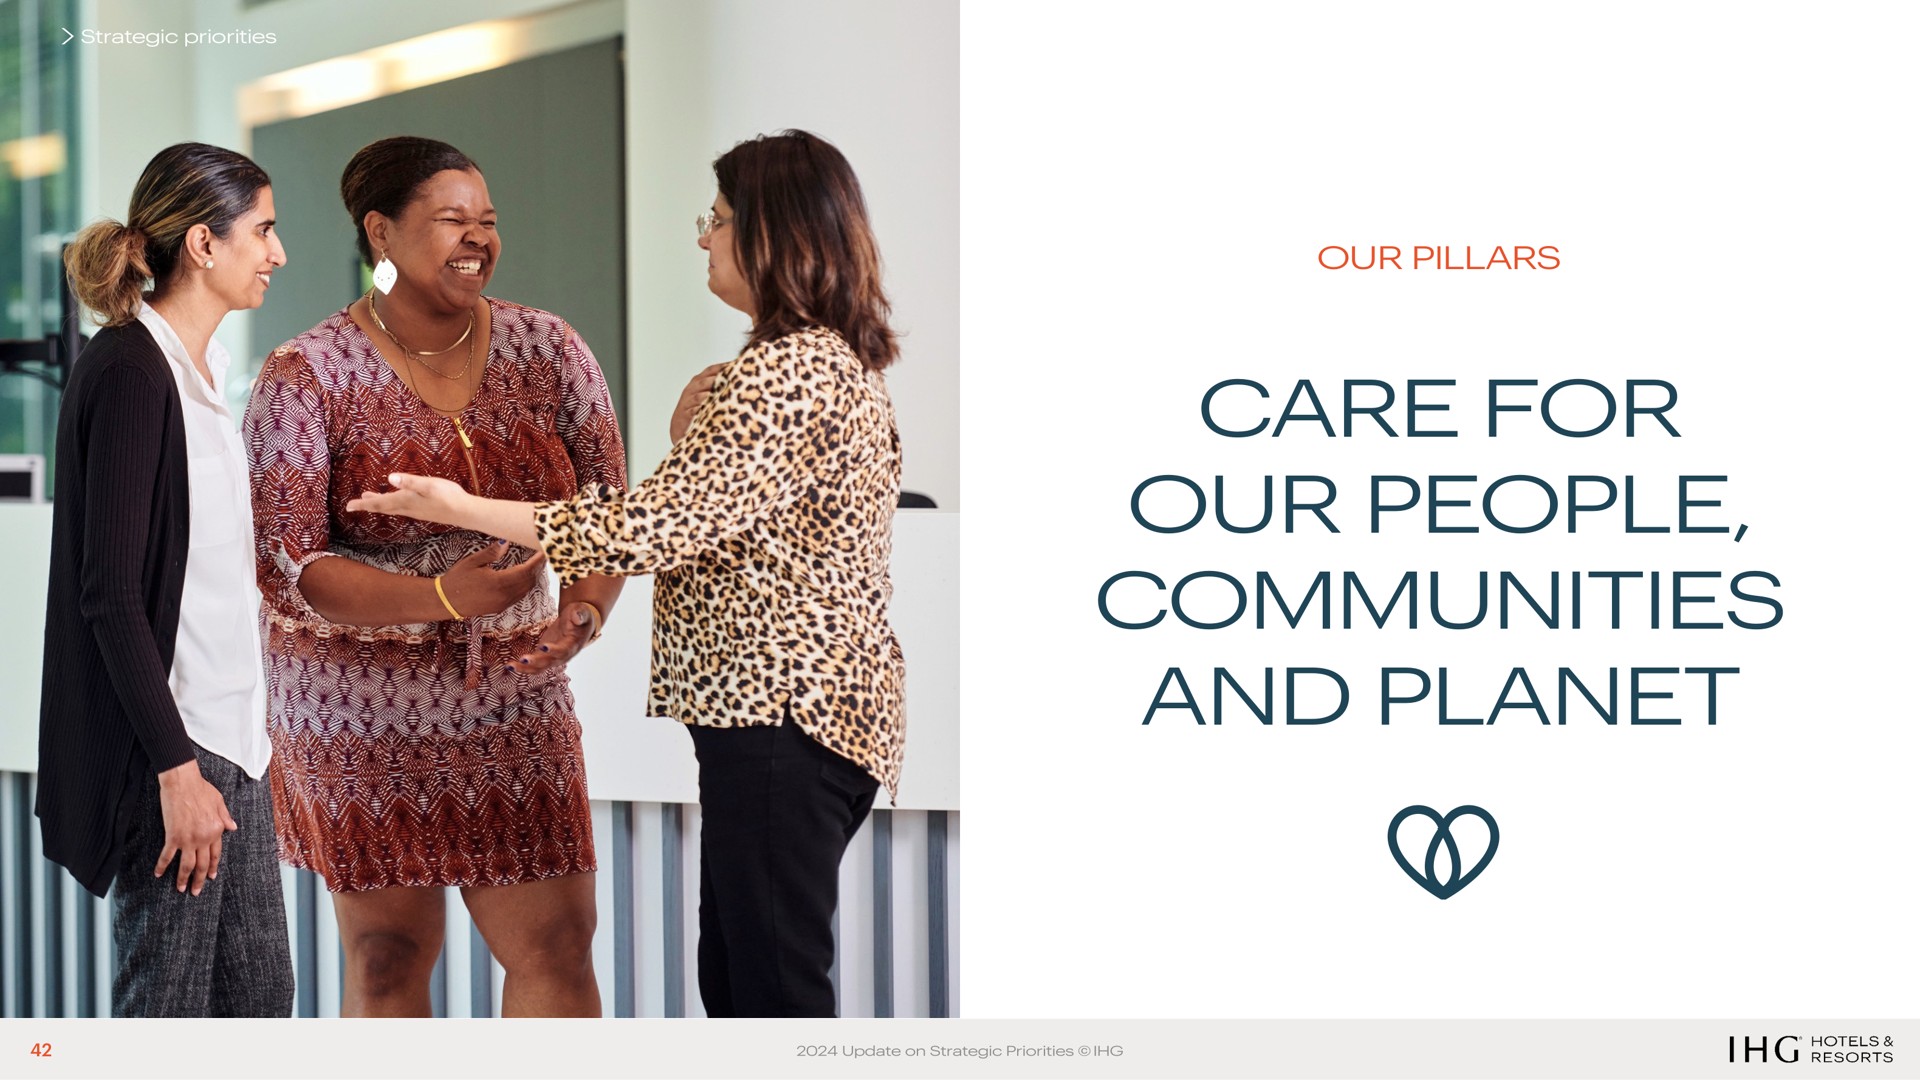 care for our people communities and planet | IHG Hotels